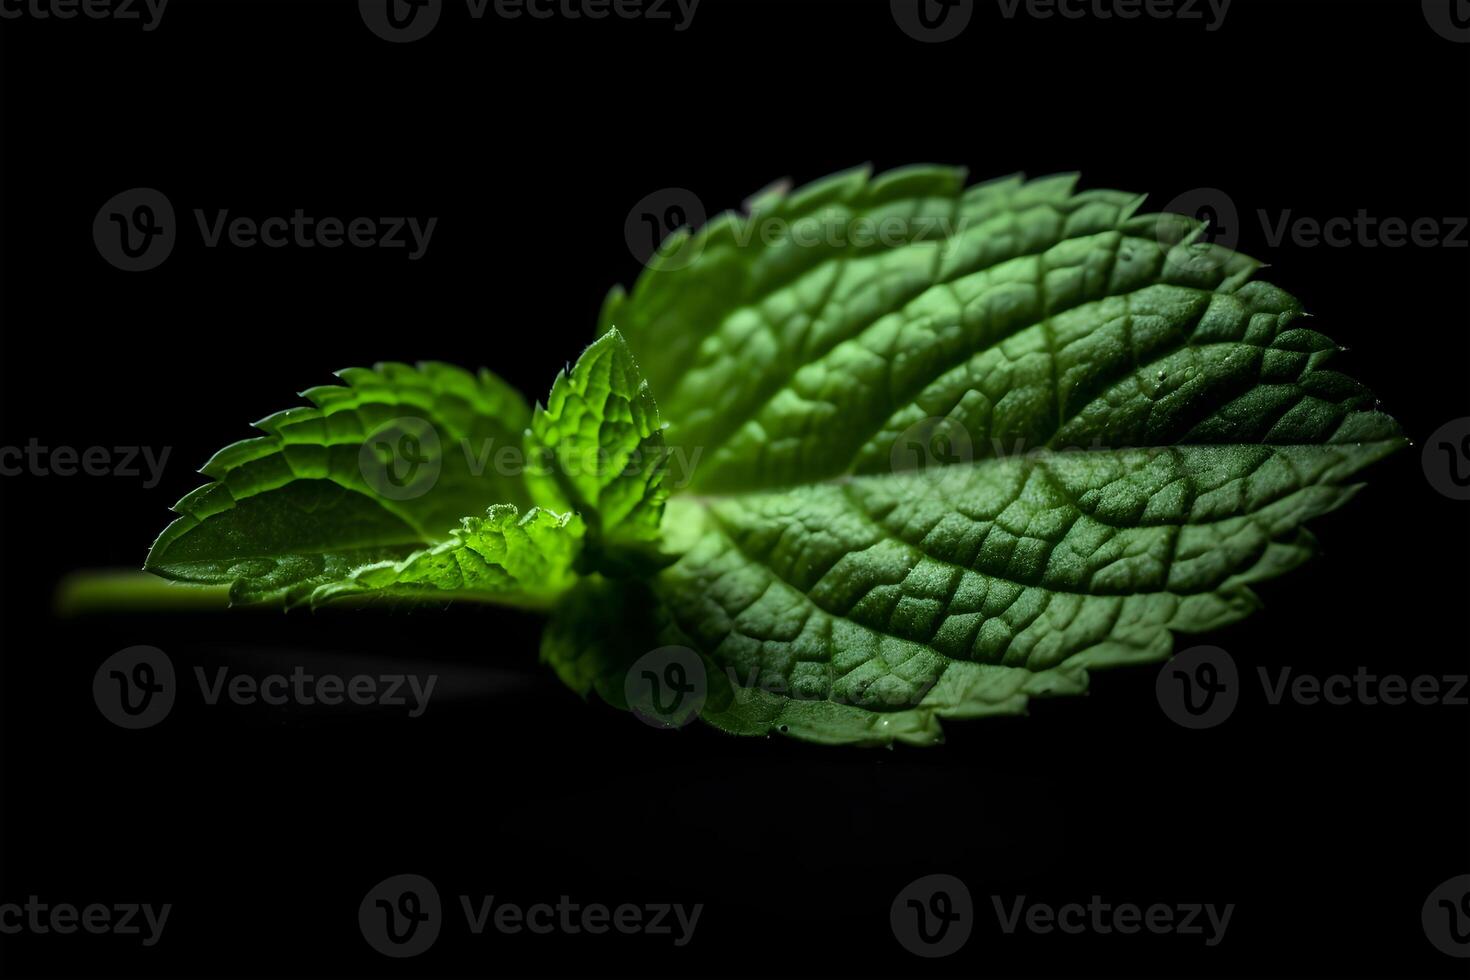 papermint leaf isolated on black background photo